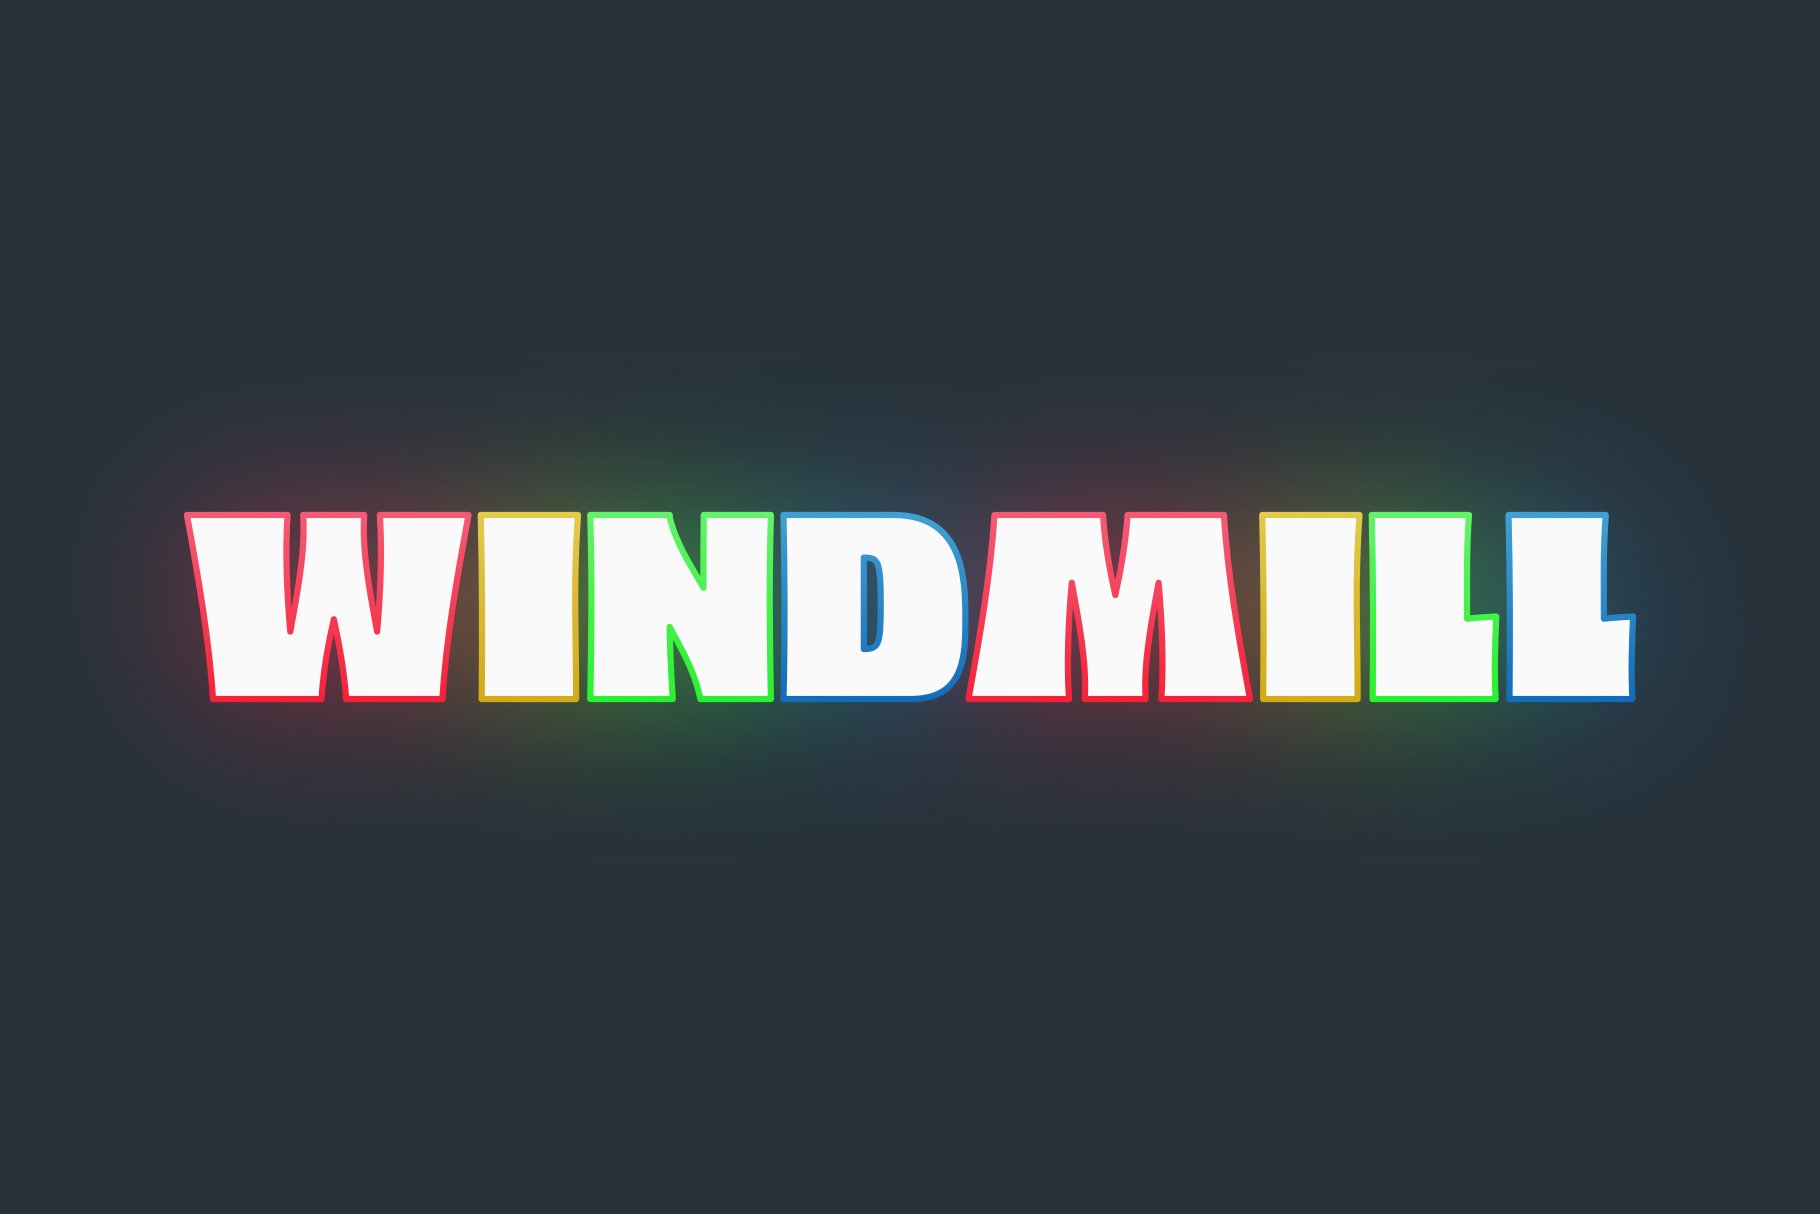 The word windmill is made up of multicolored letters.